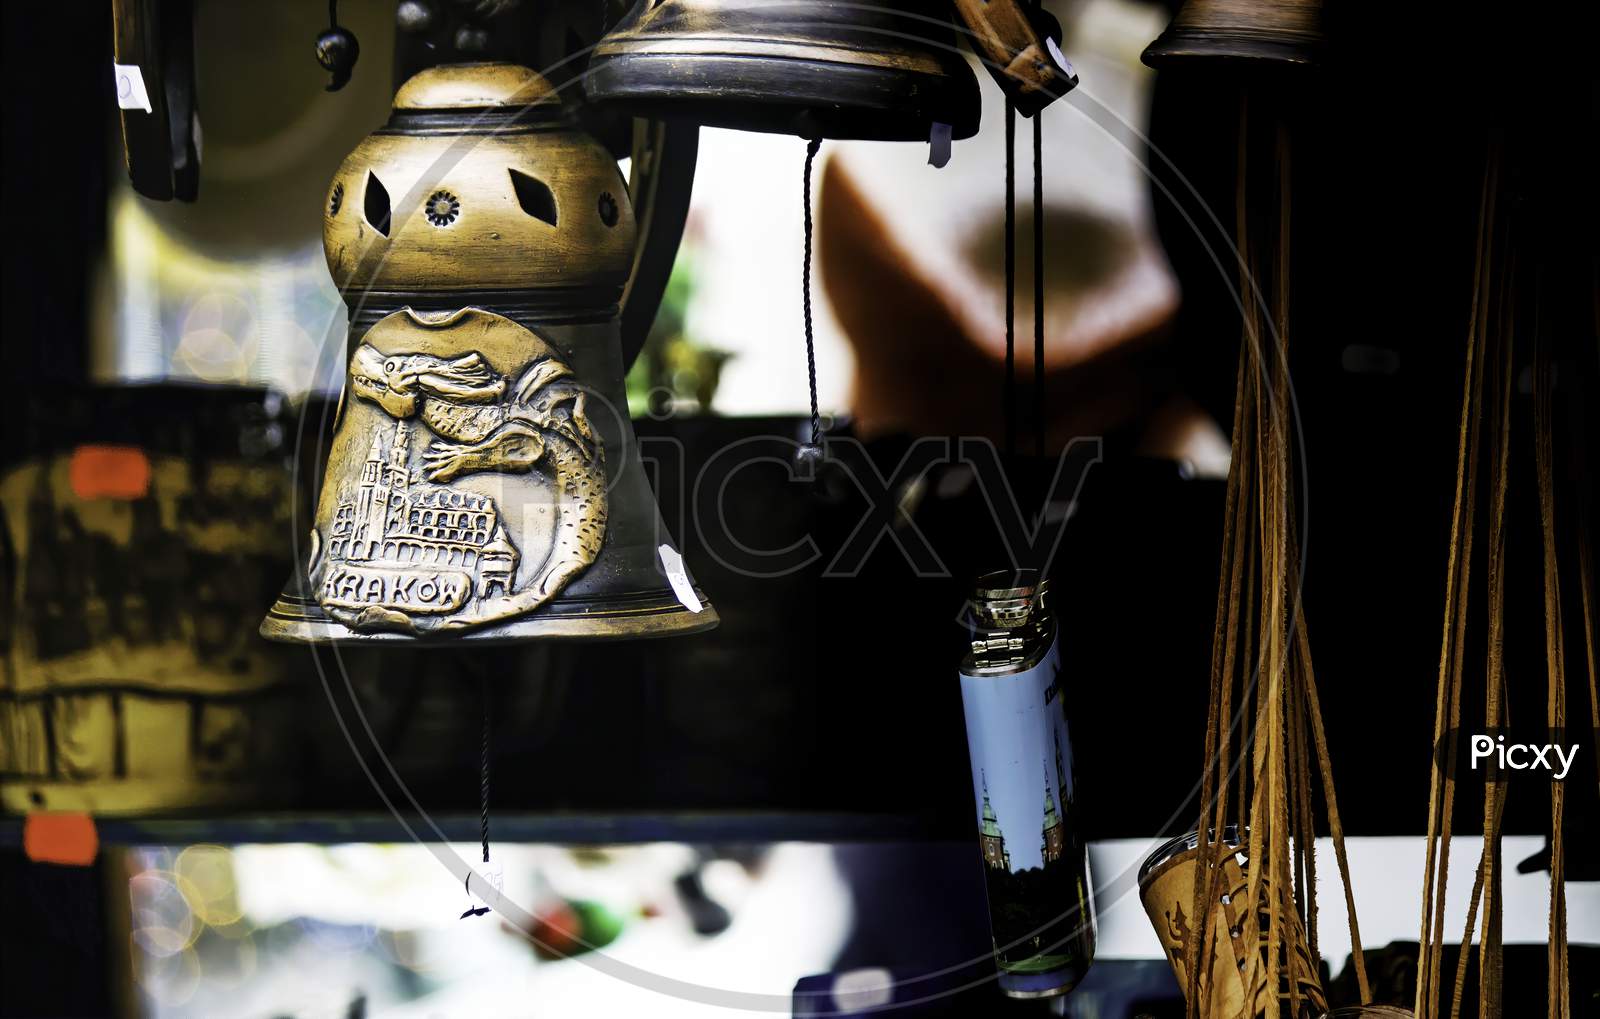 Krakow, Poland - December 08, 2014: Street Photography Of Souvenir Shops And Items Kept In It For Tourists In Main Square Center Of City